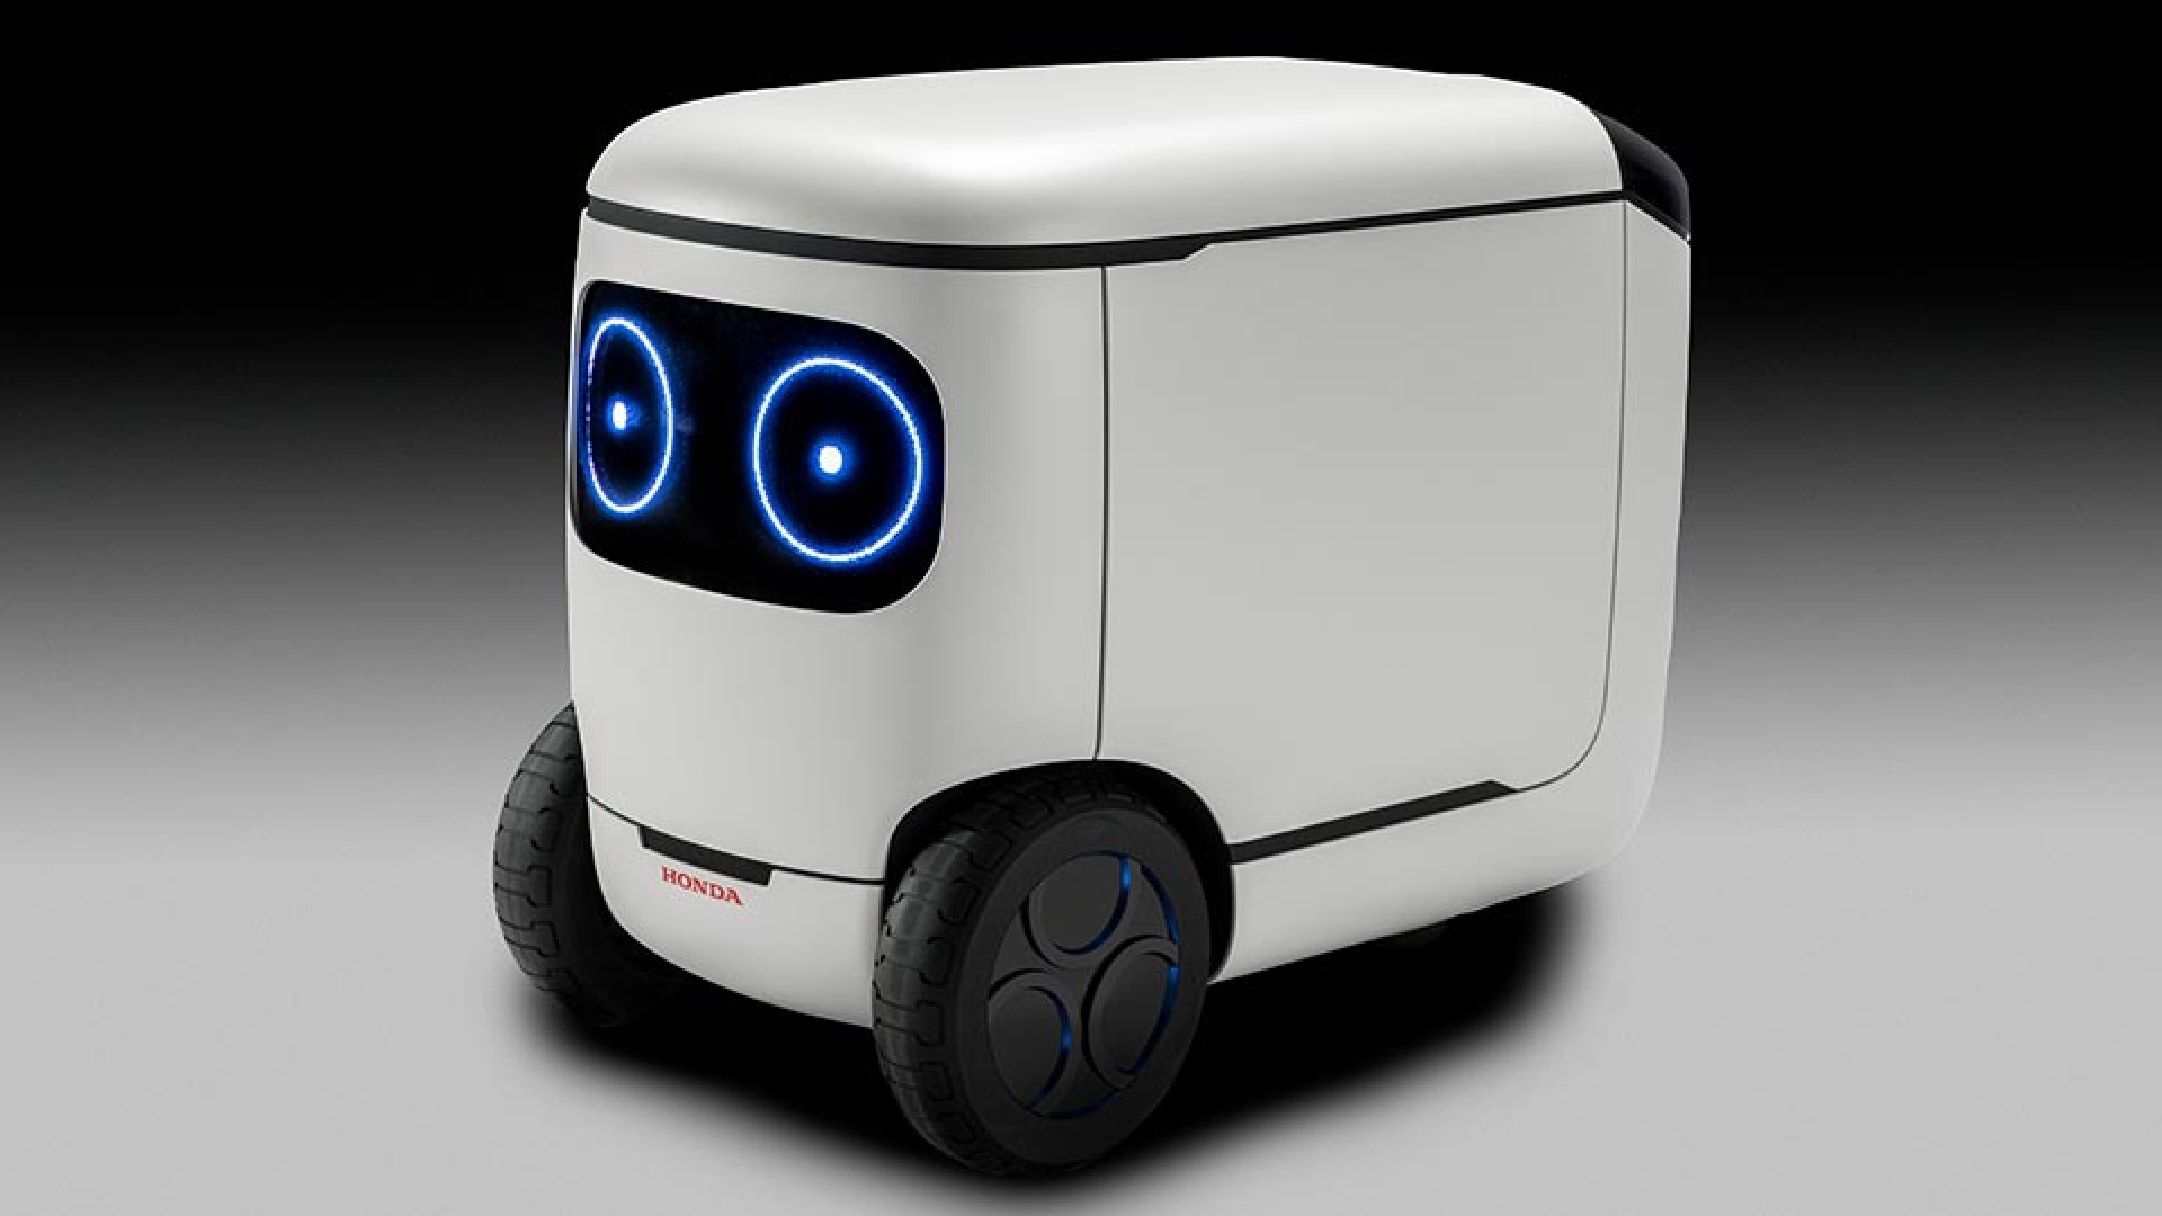 The 3E-C18 AI-equipped robotic device designed to grow together with people, was unveiled at CES 2018.